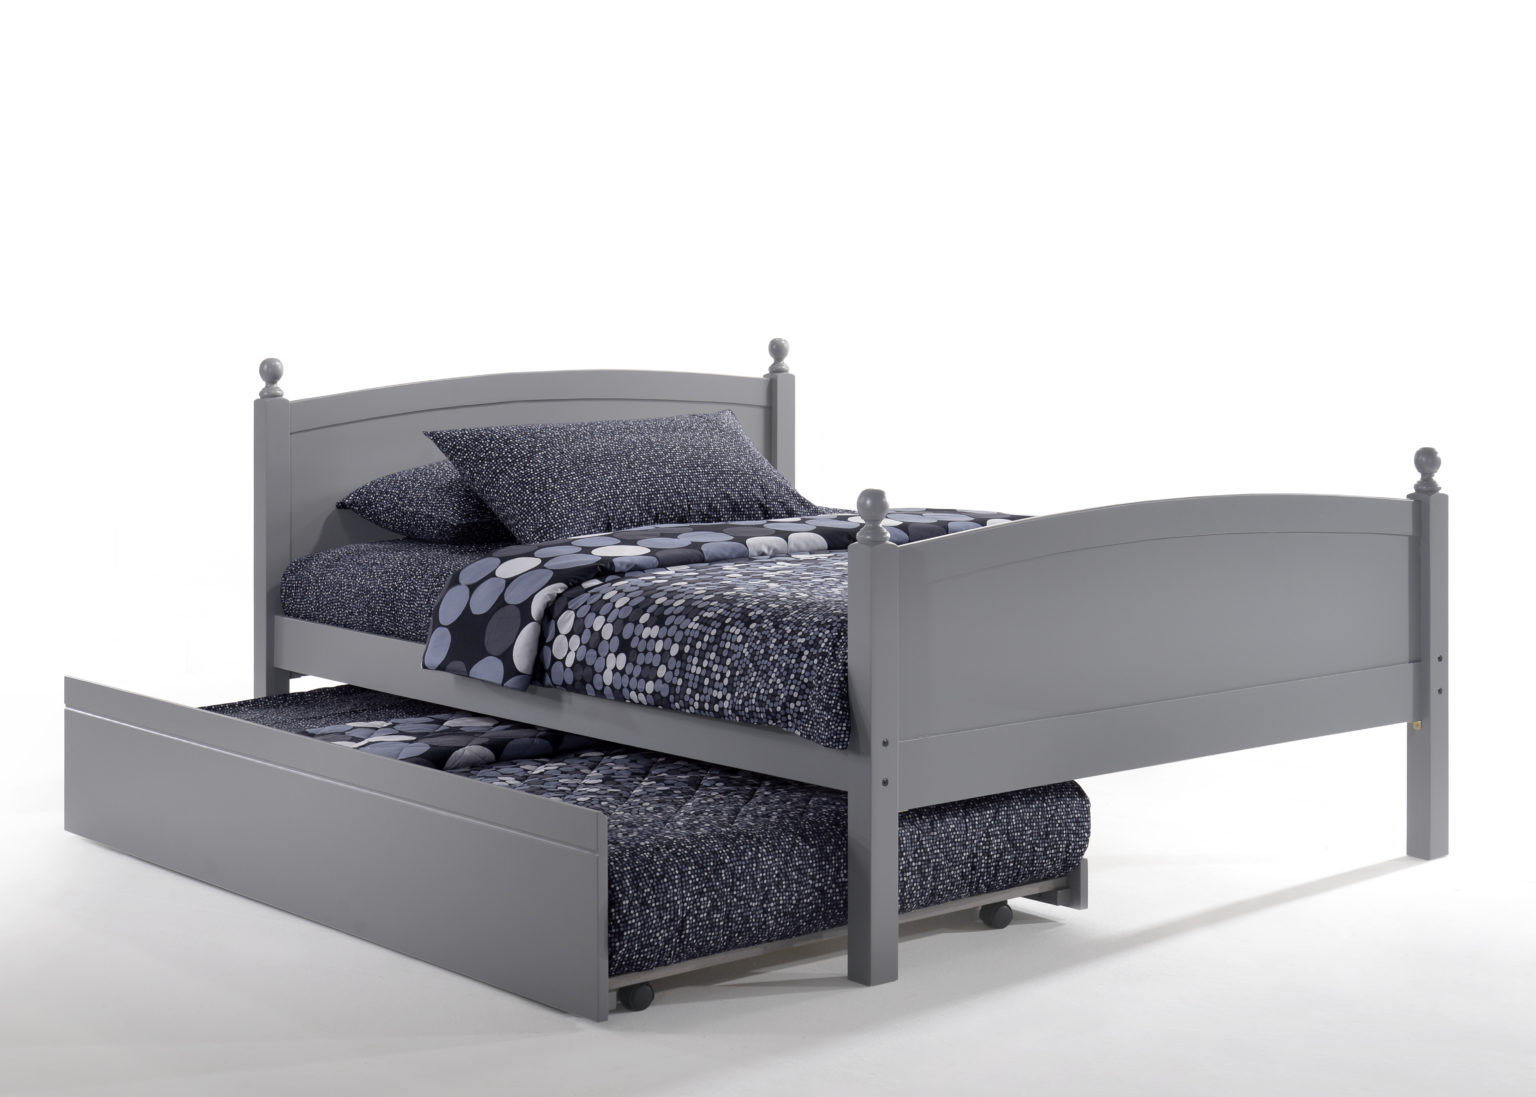 Full Zest Licorice Bed in Gray with Trundle